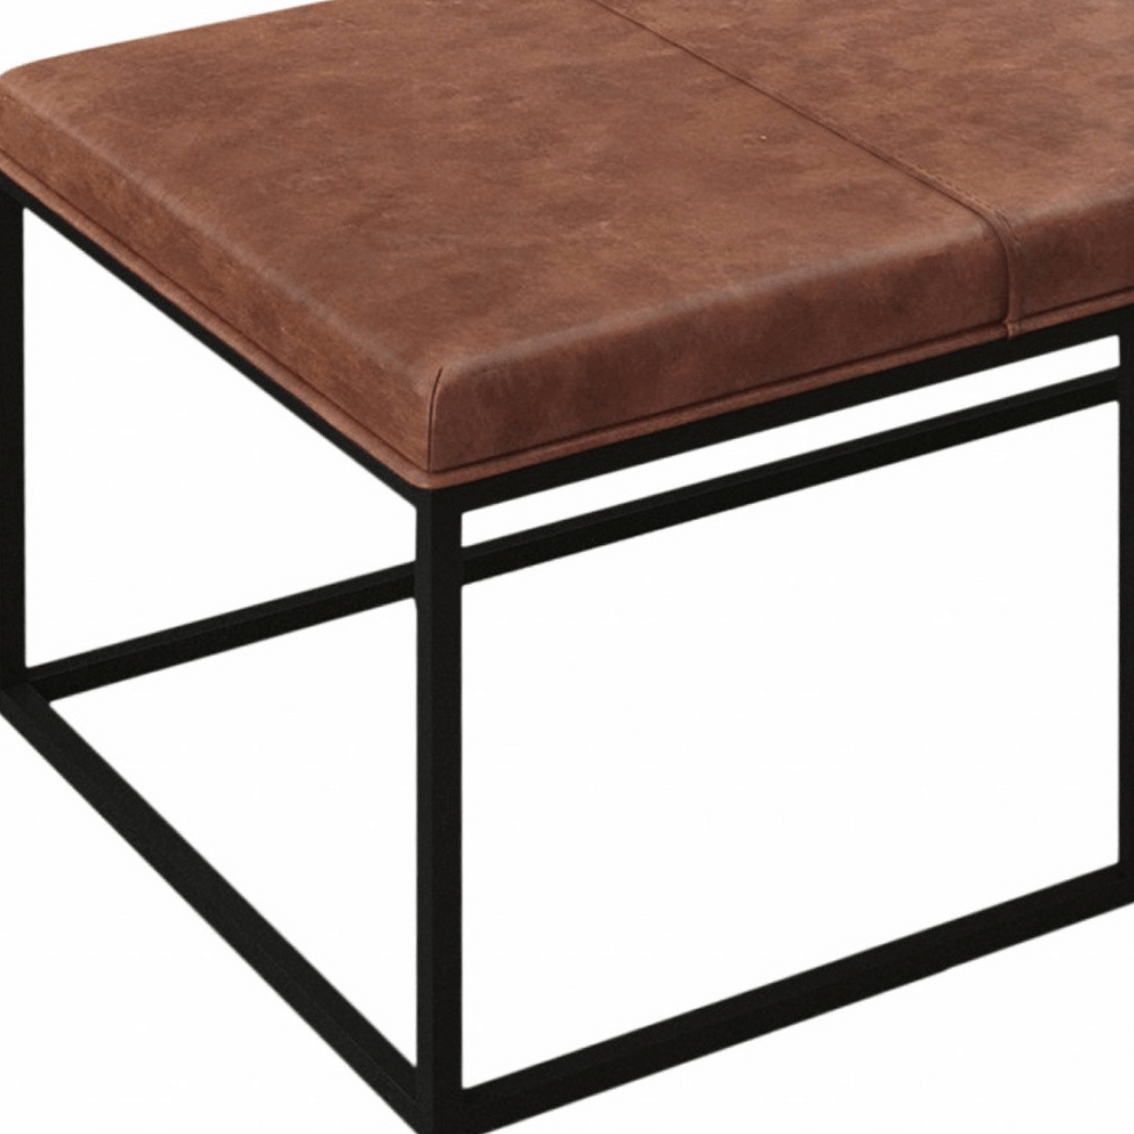 MCM Styled Center Table Bench Brown Faux Leather on Black Metal Base 46" - Revel Sofa 